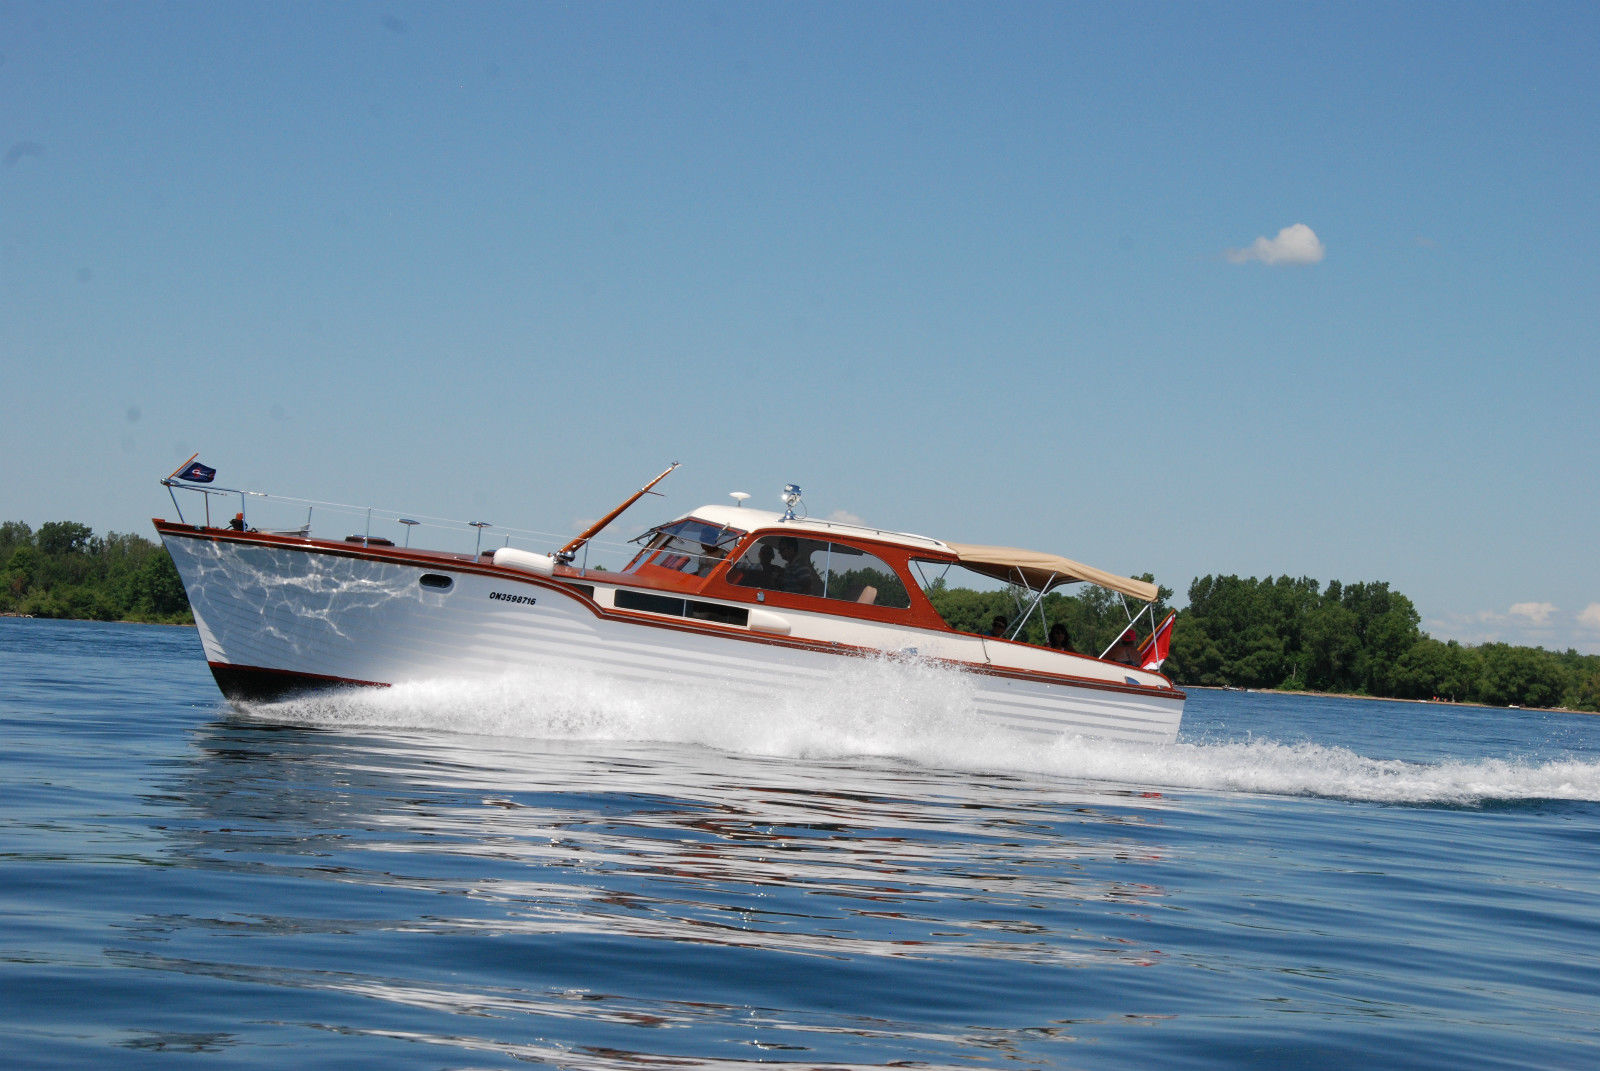 Chris Craft SEA SKIFF 1957 for sale for $300,000 - Boats 